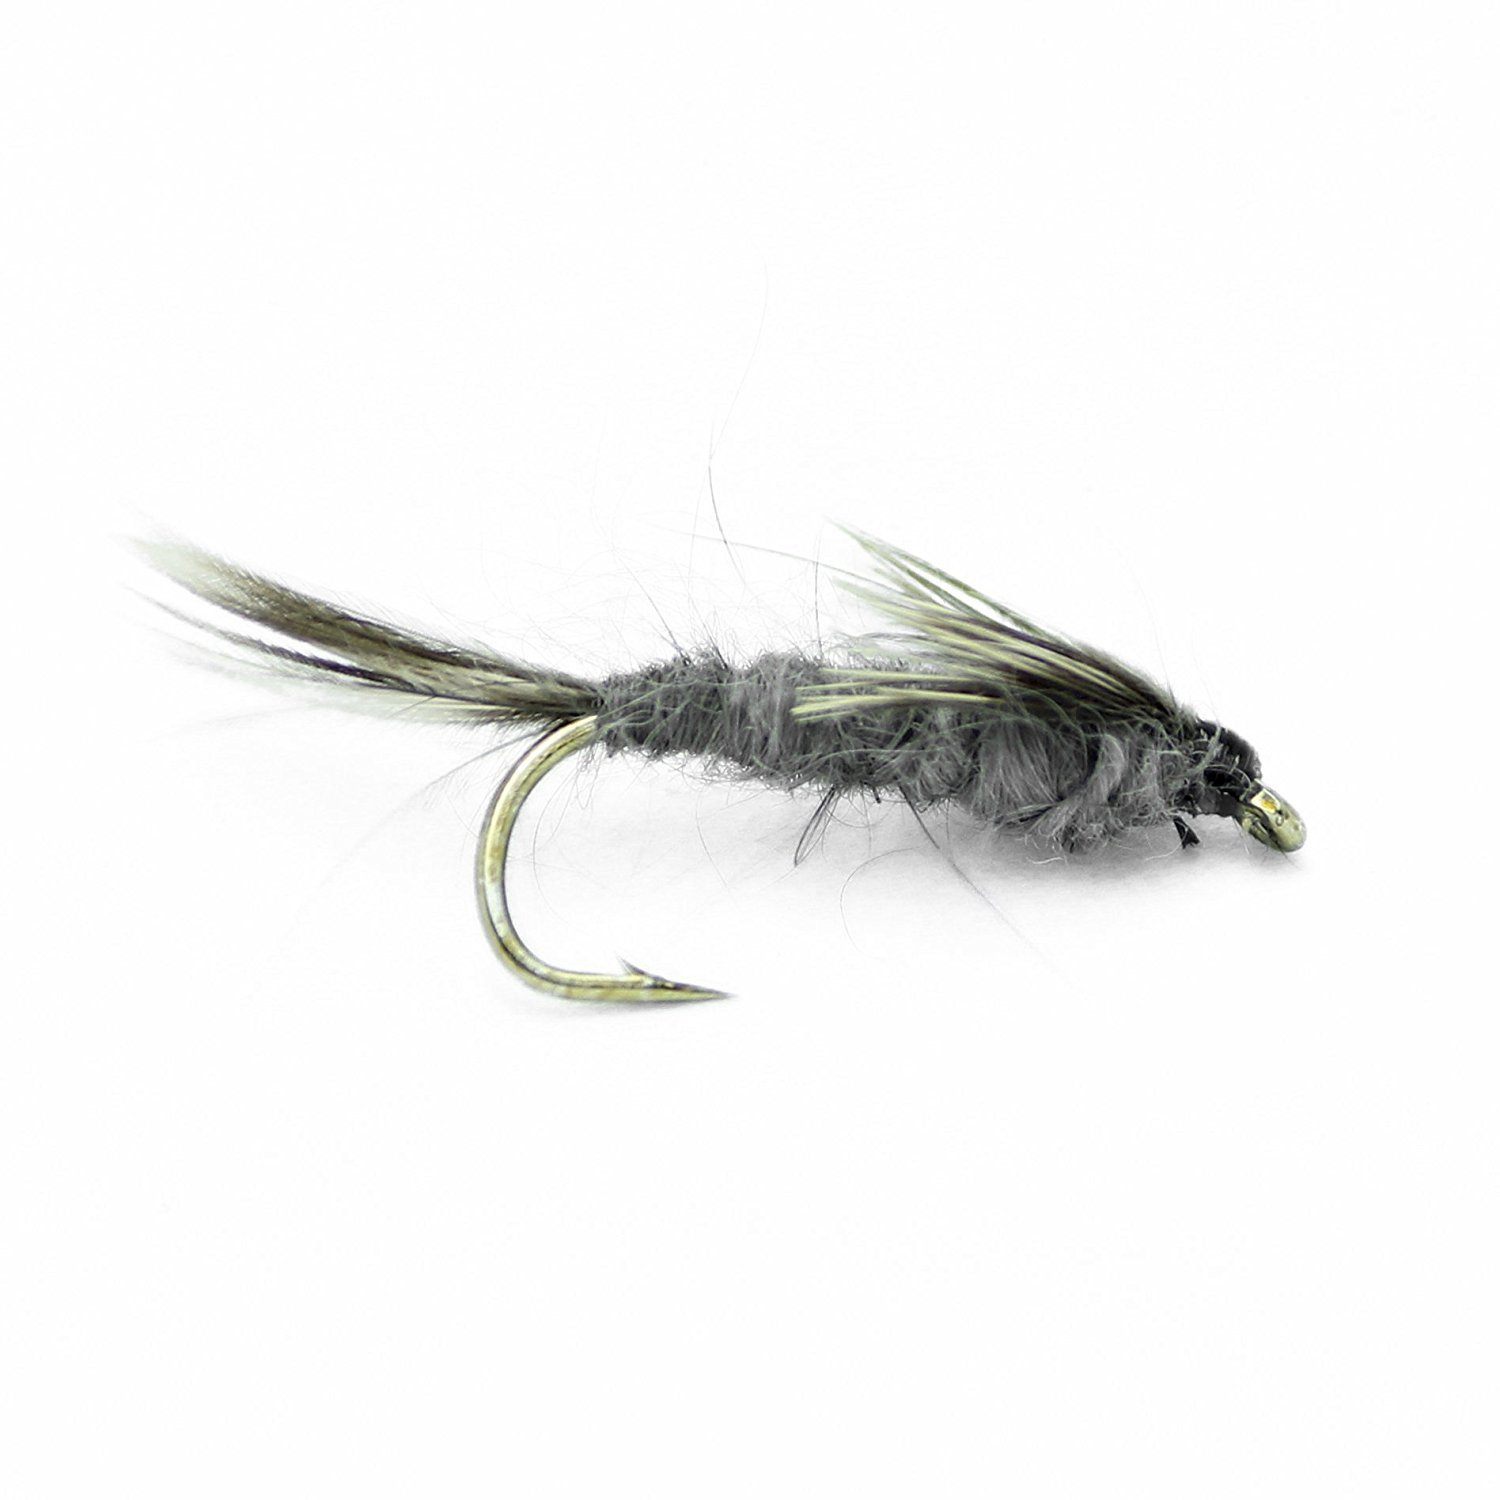  Feeder Creek Fly Fishing Assortment, 24 Dry Flies in 8  Patterns (Adams Fly, Renegade, Dun and More) for Trout, Bass and Salmon,  Size 14, Includes Fly Box : Sports & Outdoors